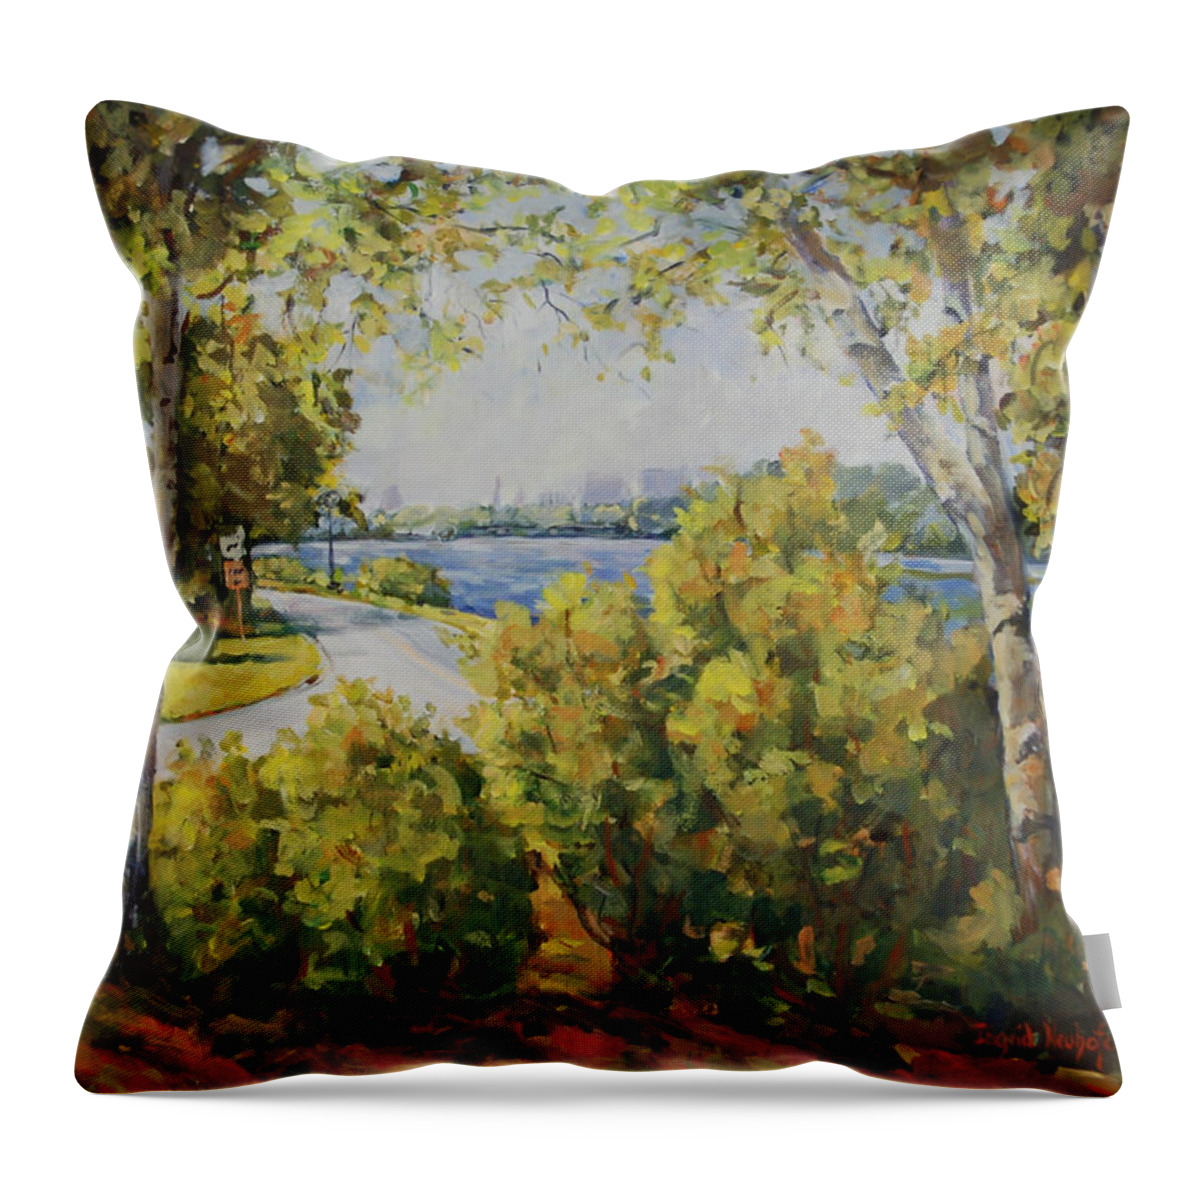 Rockford Il Throw Pillow featuring the painting Rock River Bike Path by Ingrid Dohm